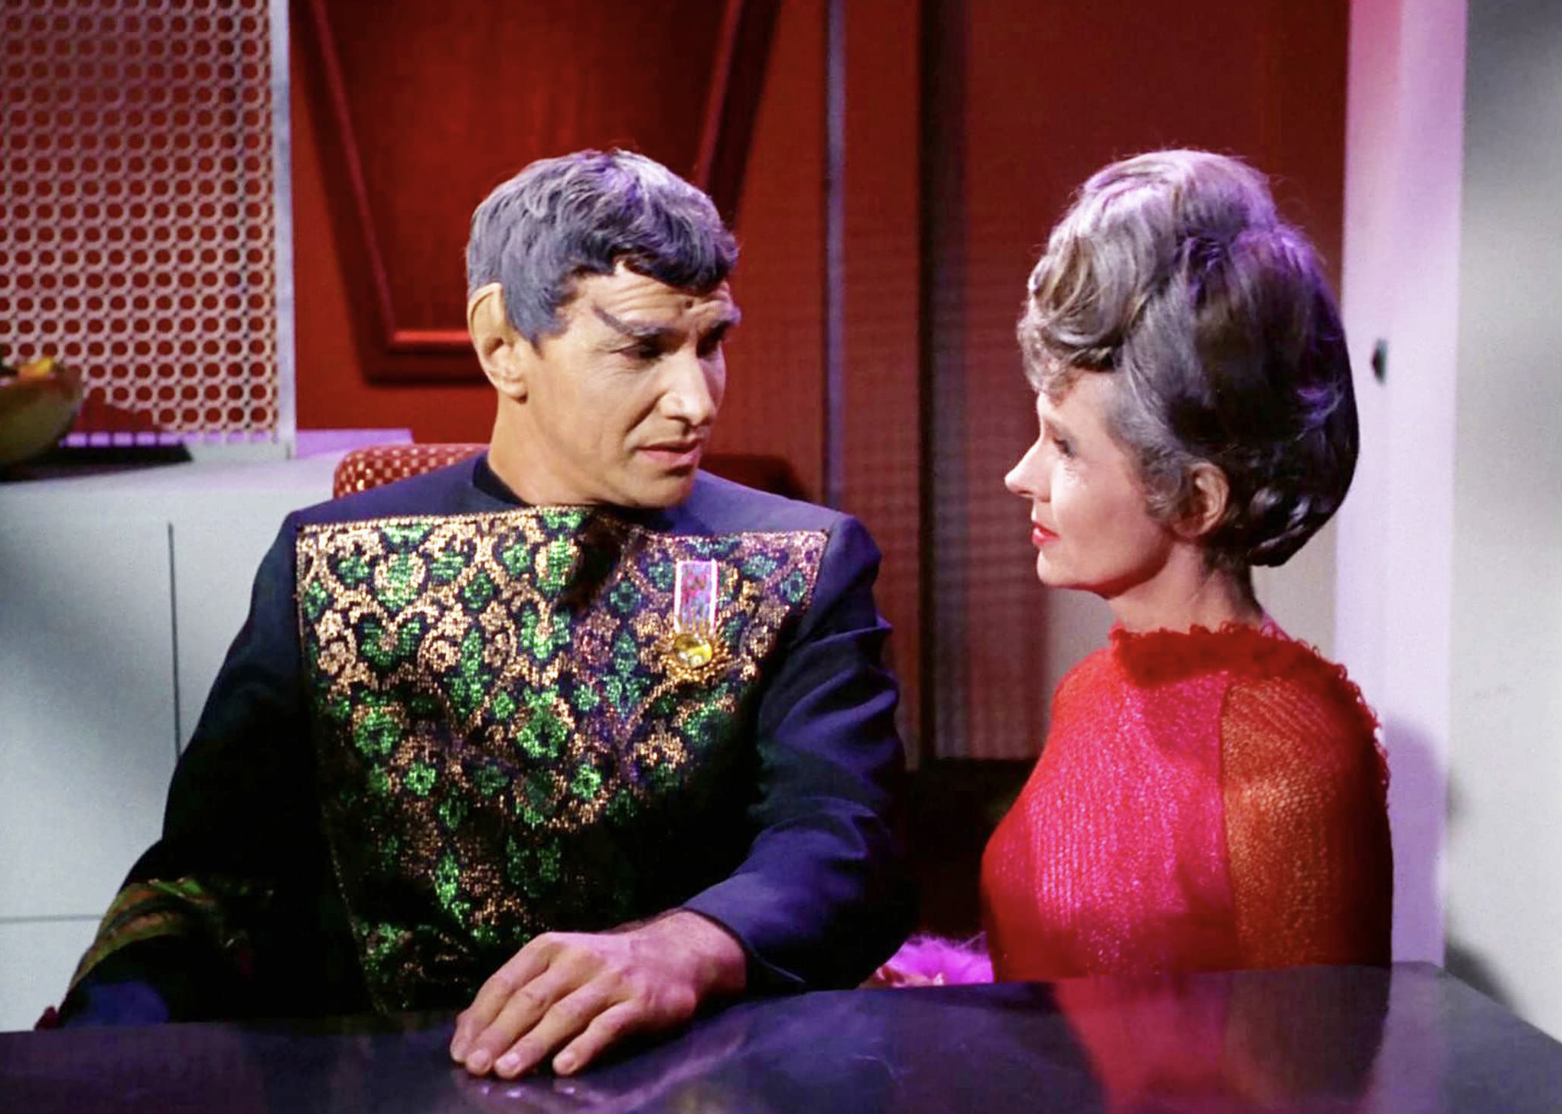 <p>- IMDb user rating: 8.5<br> - Season 2, Episode 10<br> - Director: Joseph Pevney</p>  <p>Some significant characters in "Star Trek" lore make their first appearance in Episode 10 of Season Two, as Spock's parents Sarek and Amanda (the latter being human) feature heavily. Sarek, an ambassador, is wrongly accused of murdering a foreign dignitary, and it's up to Spock to clear his name. While Sarek and Amanda made more appearances in future "Star Trek" media, this episode is their only appearance in the original series.</p>